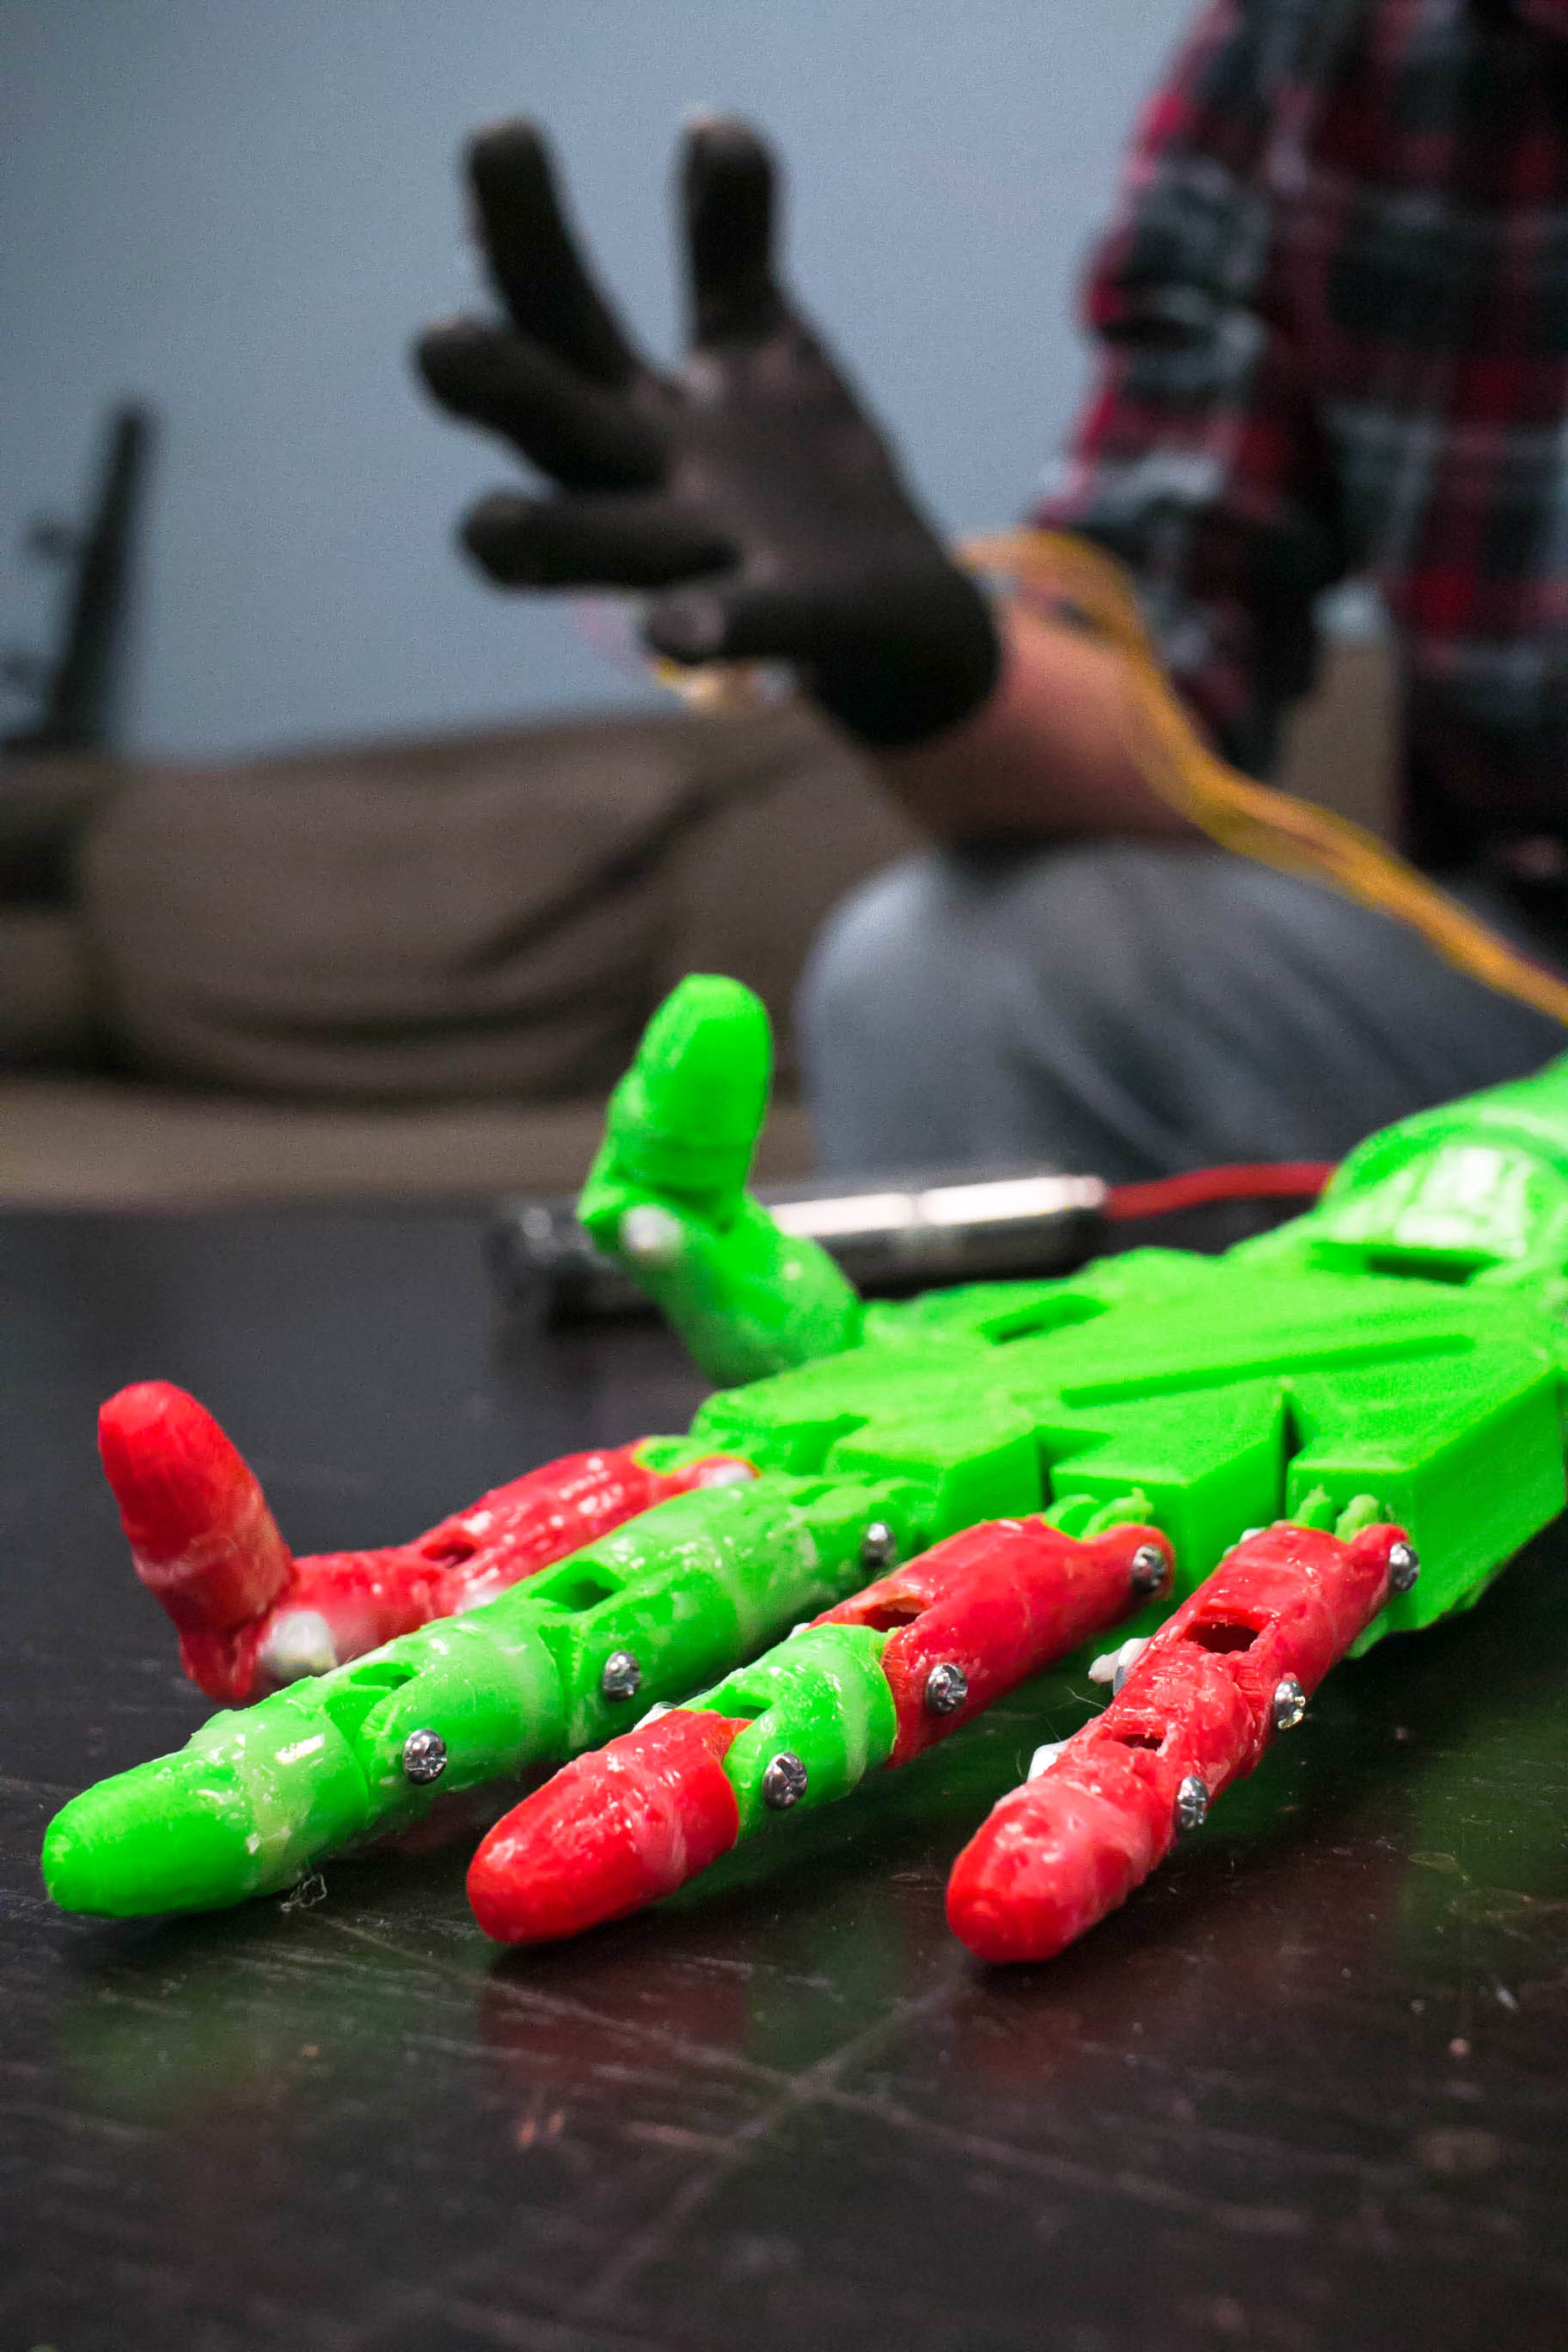 Honors student creates 3-D printed robotic hand